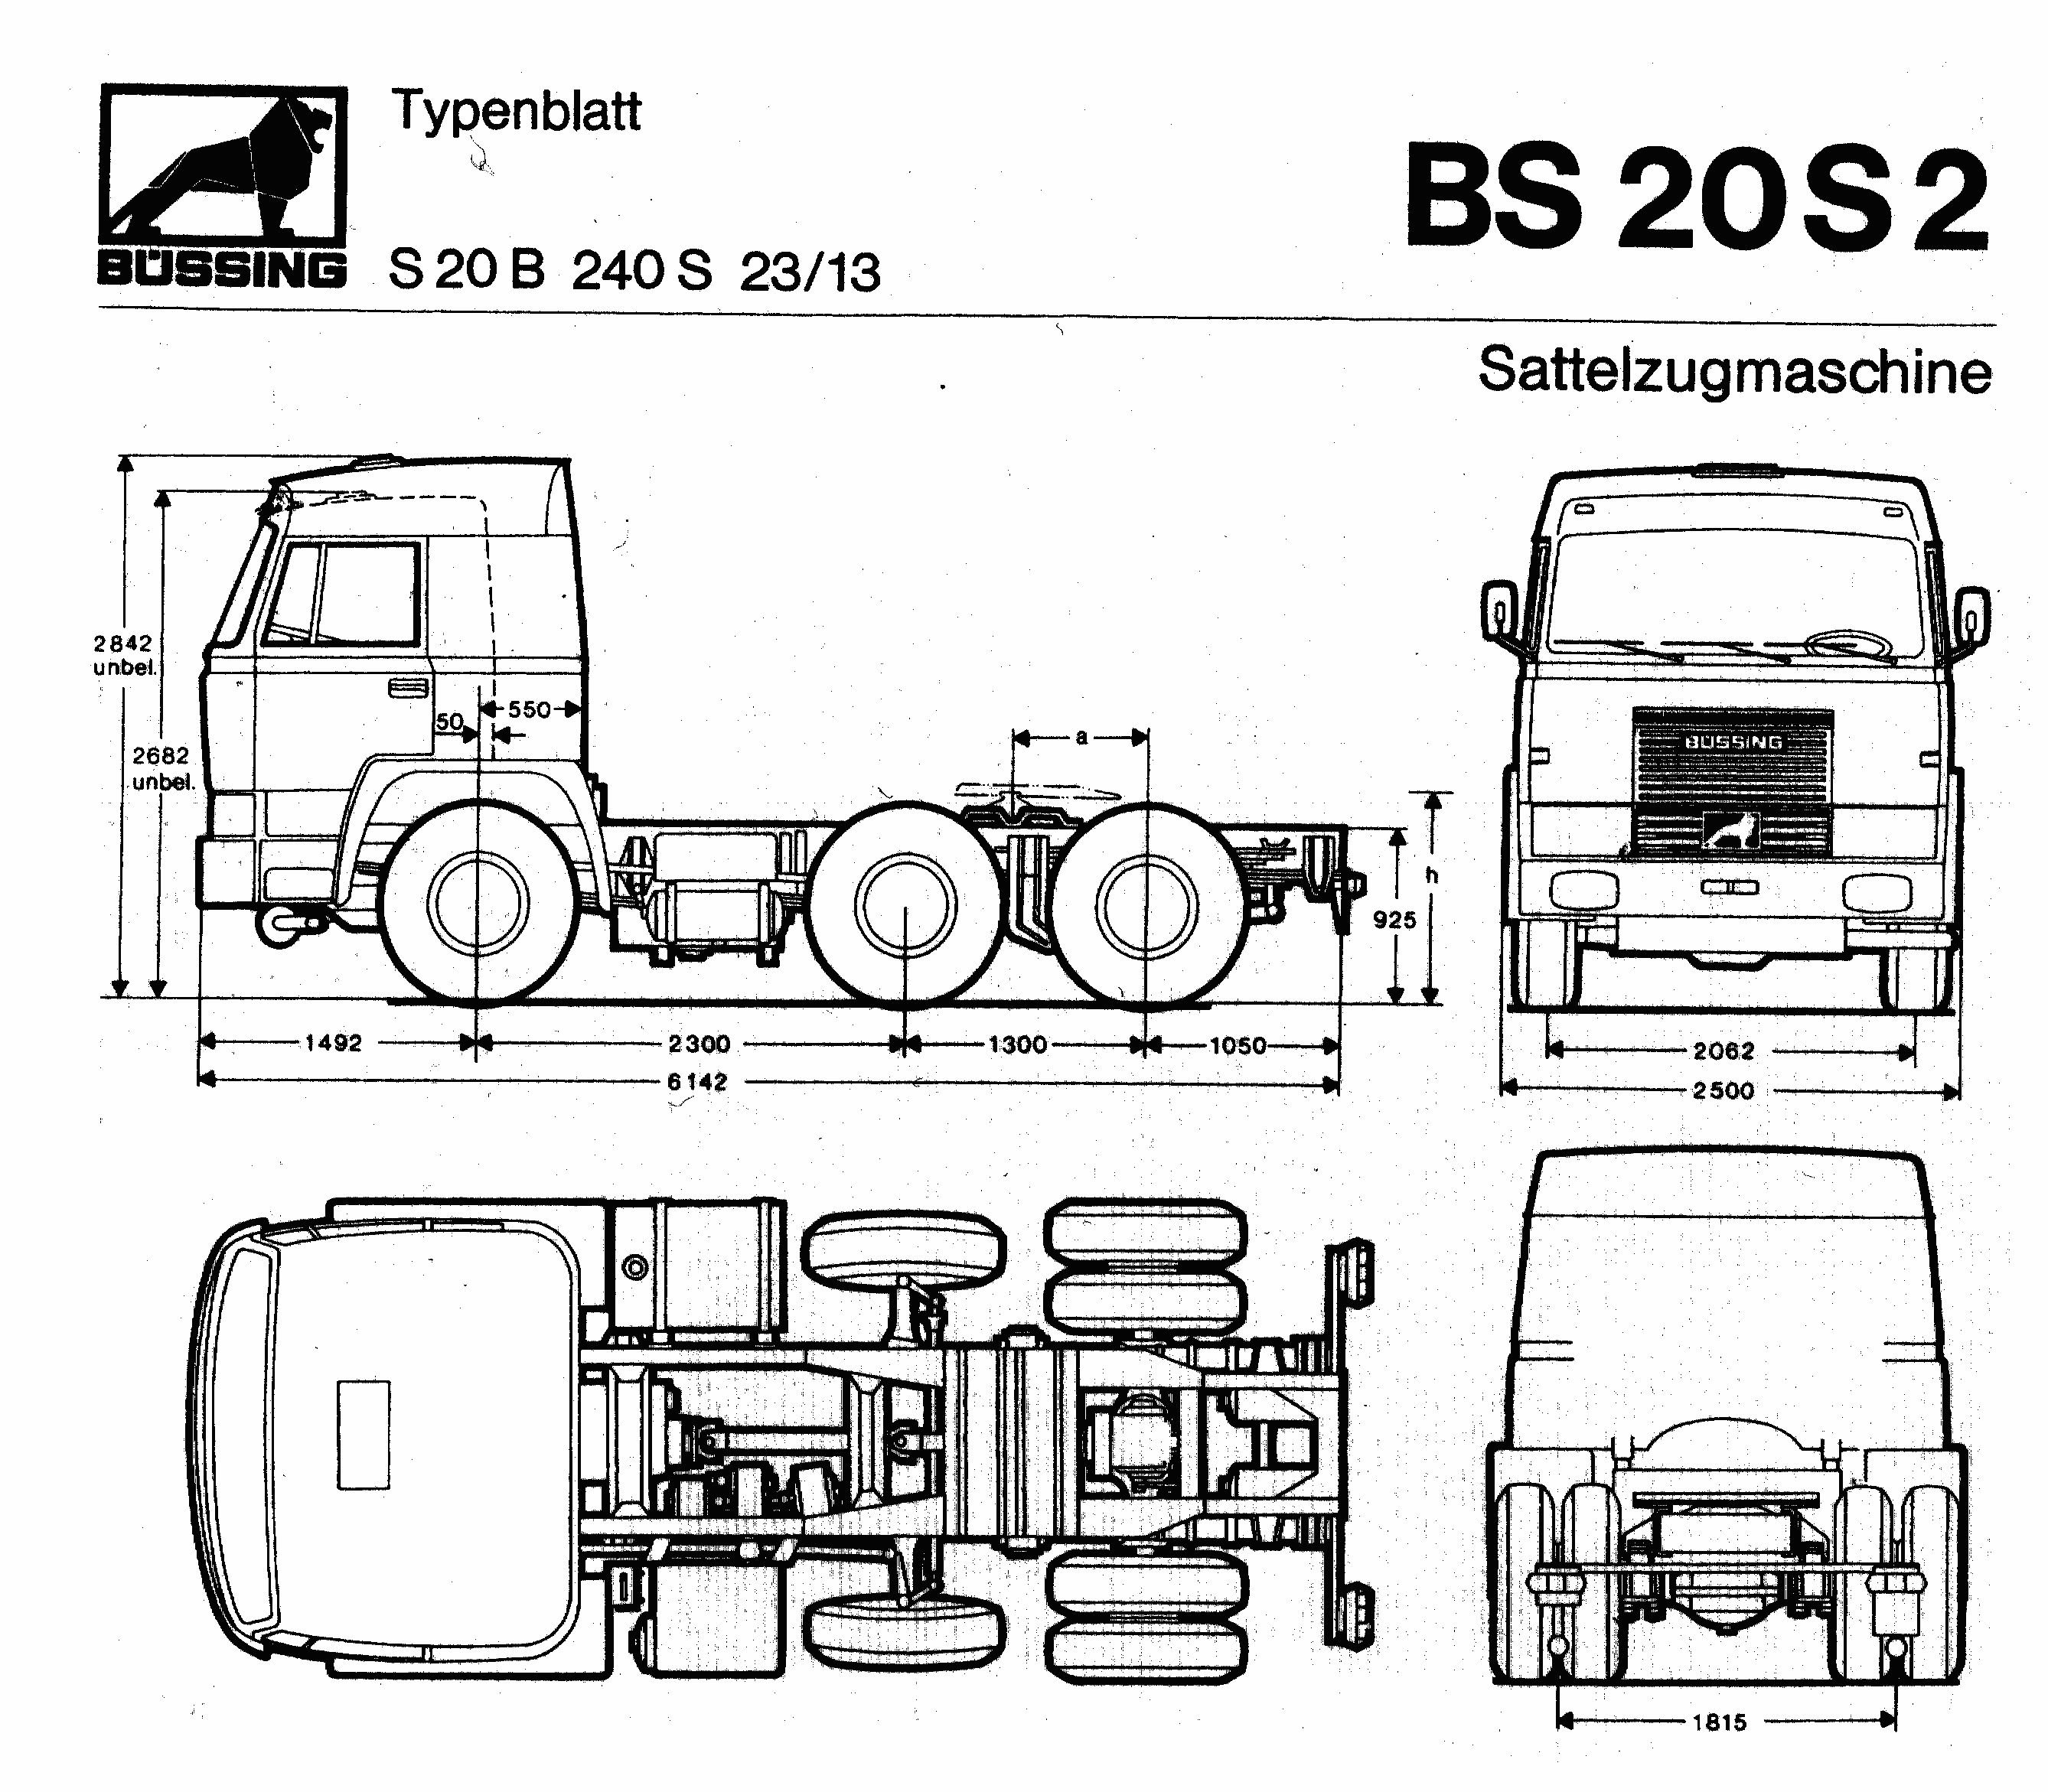 Bussing BS 20 S2 blueprint